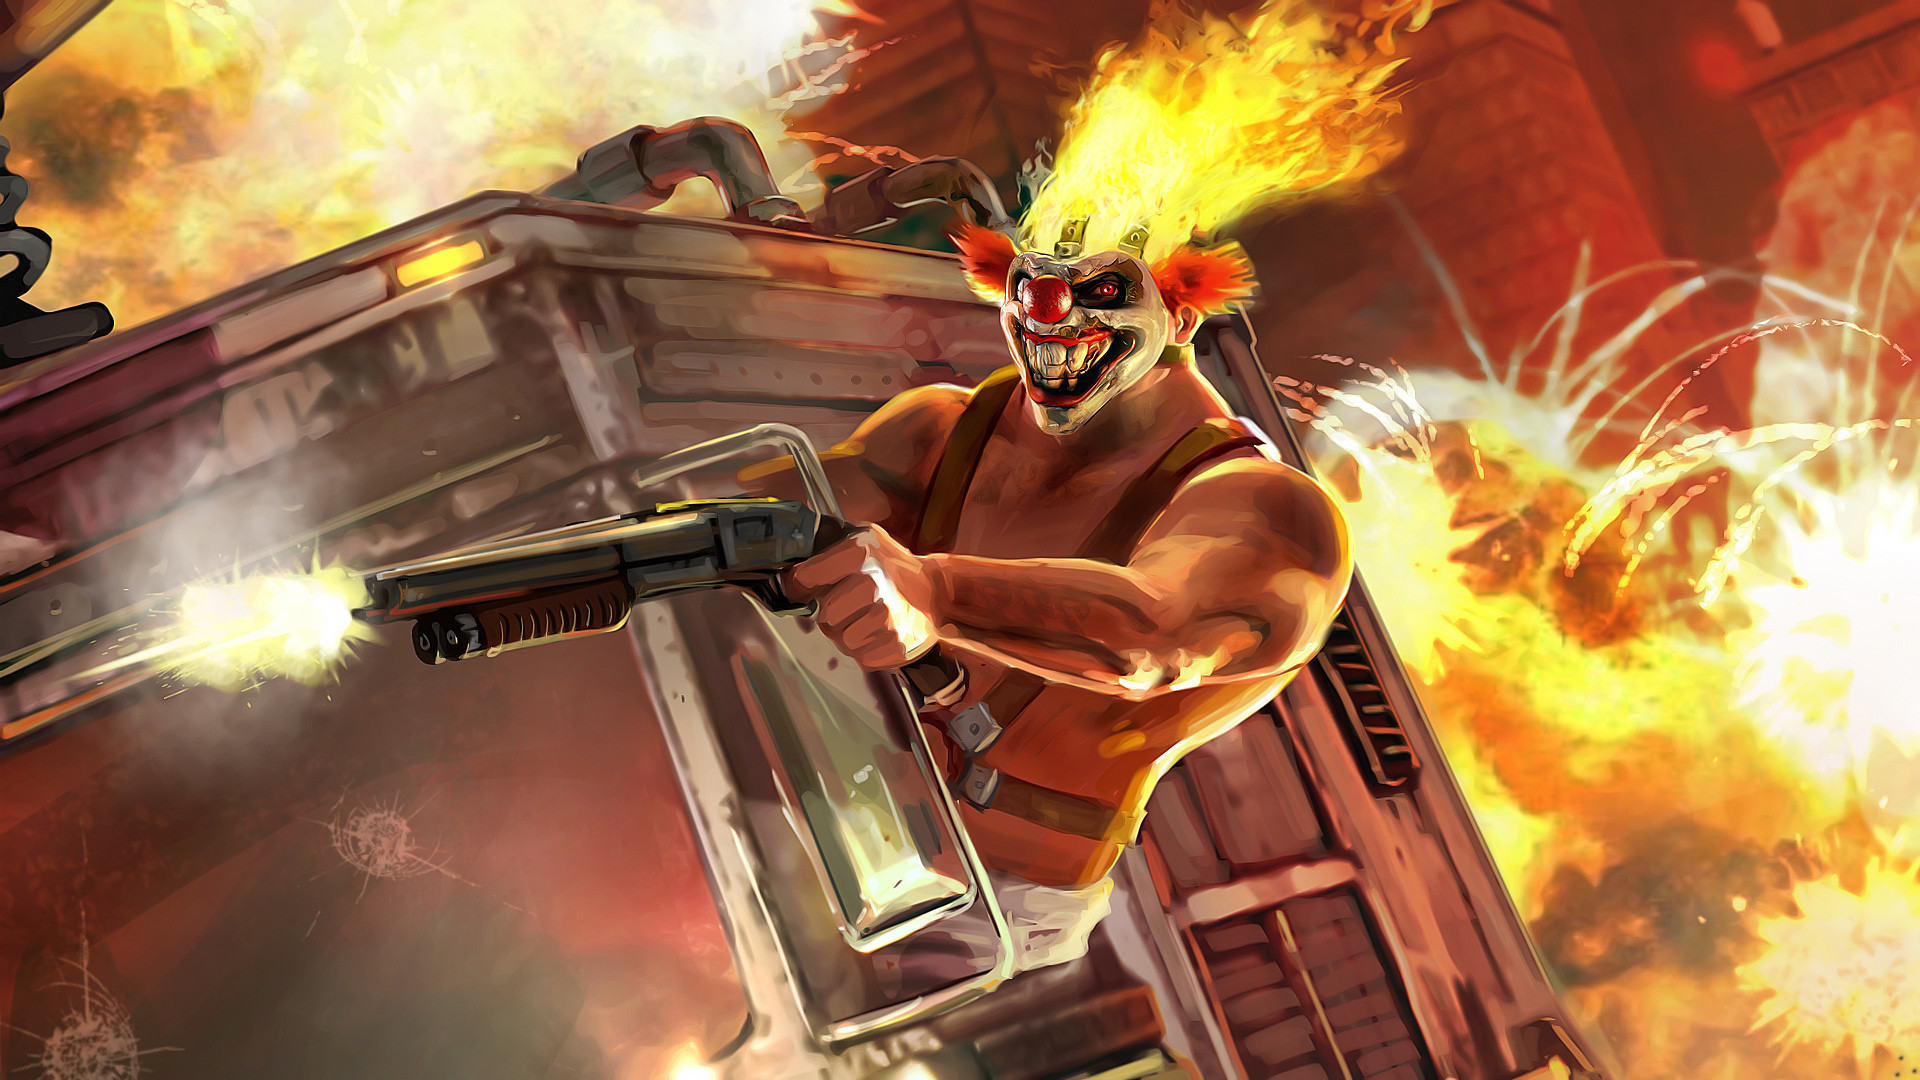 1920x1080 Twisted Metal HD Wallpaper | Background Image |  | ID:172692 -  Wallpaper Abyss